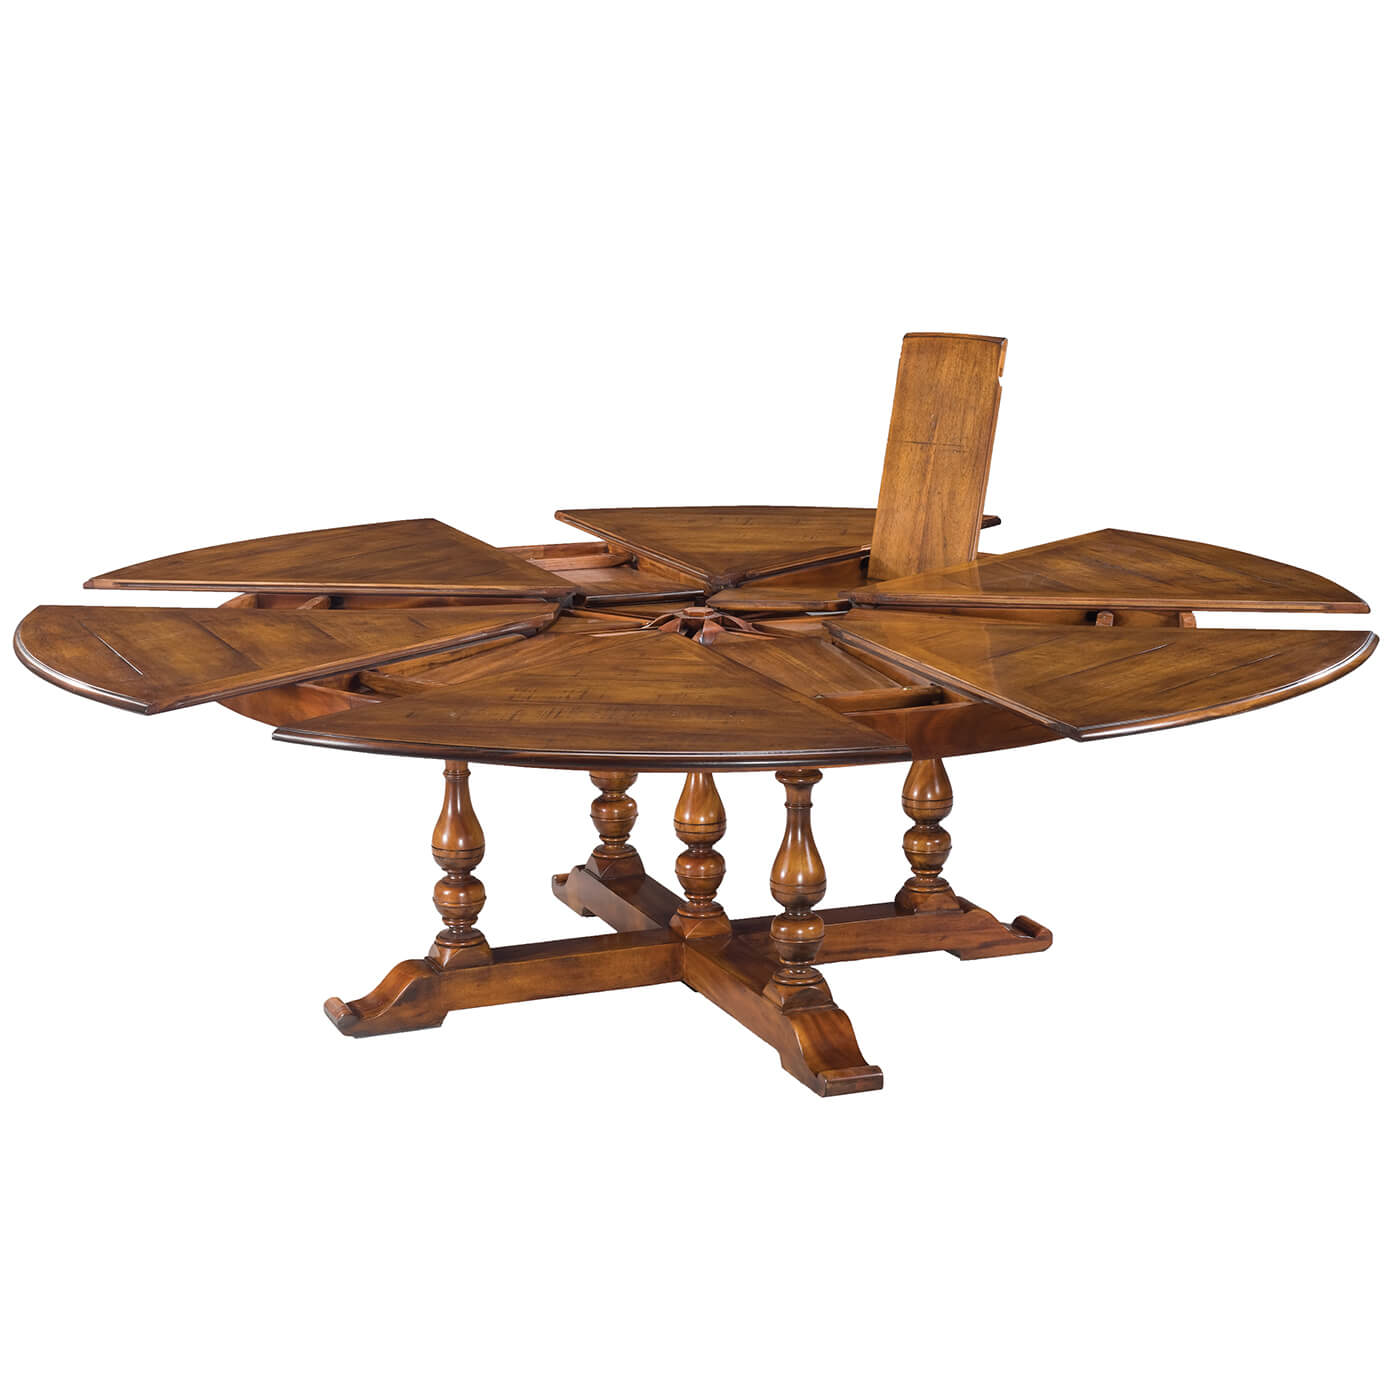 Early English Style Round Extension Dining Table, 100" - English Georgian America